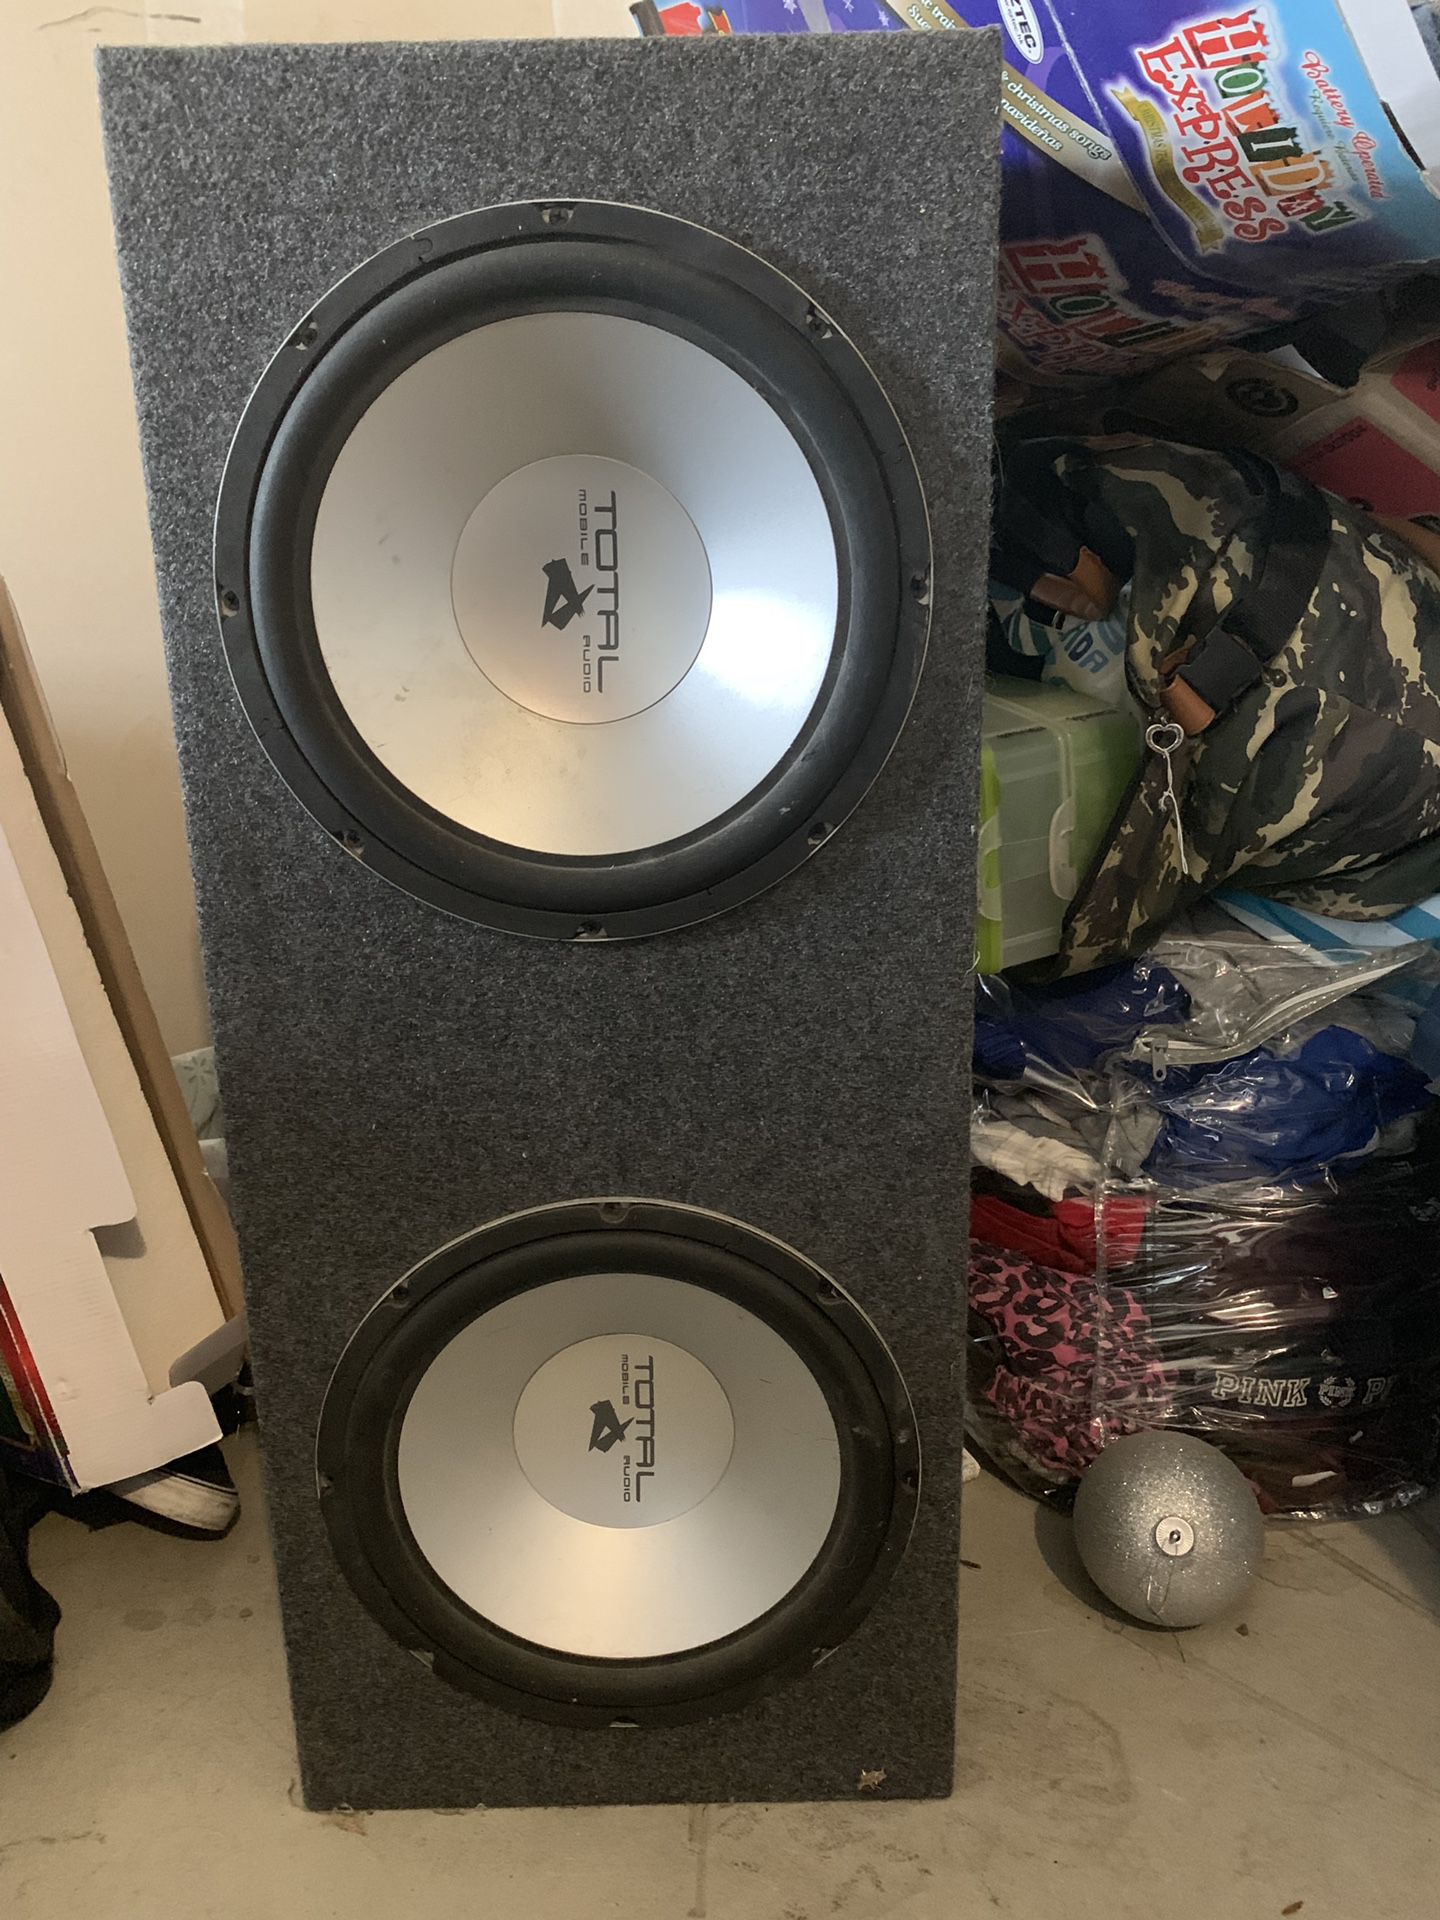 2-12 Total Audio Speakers $100 with box